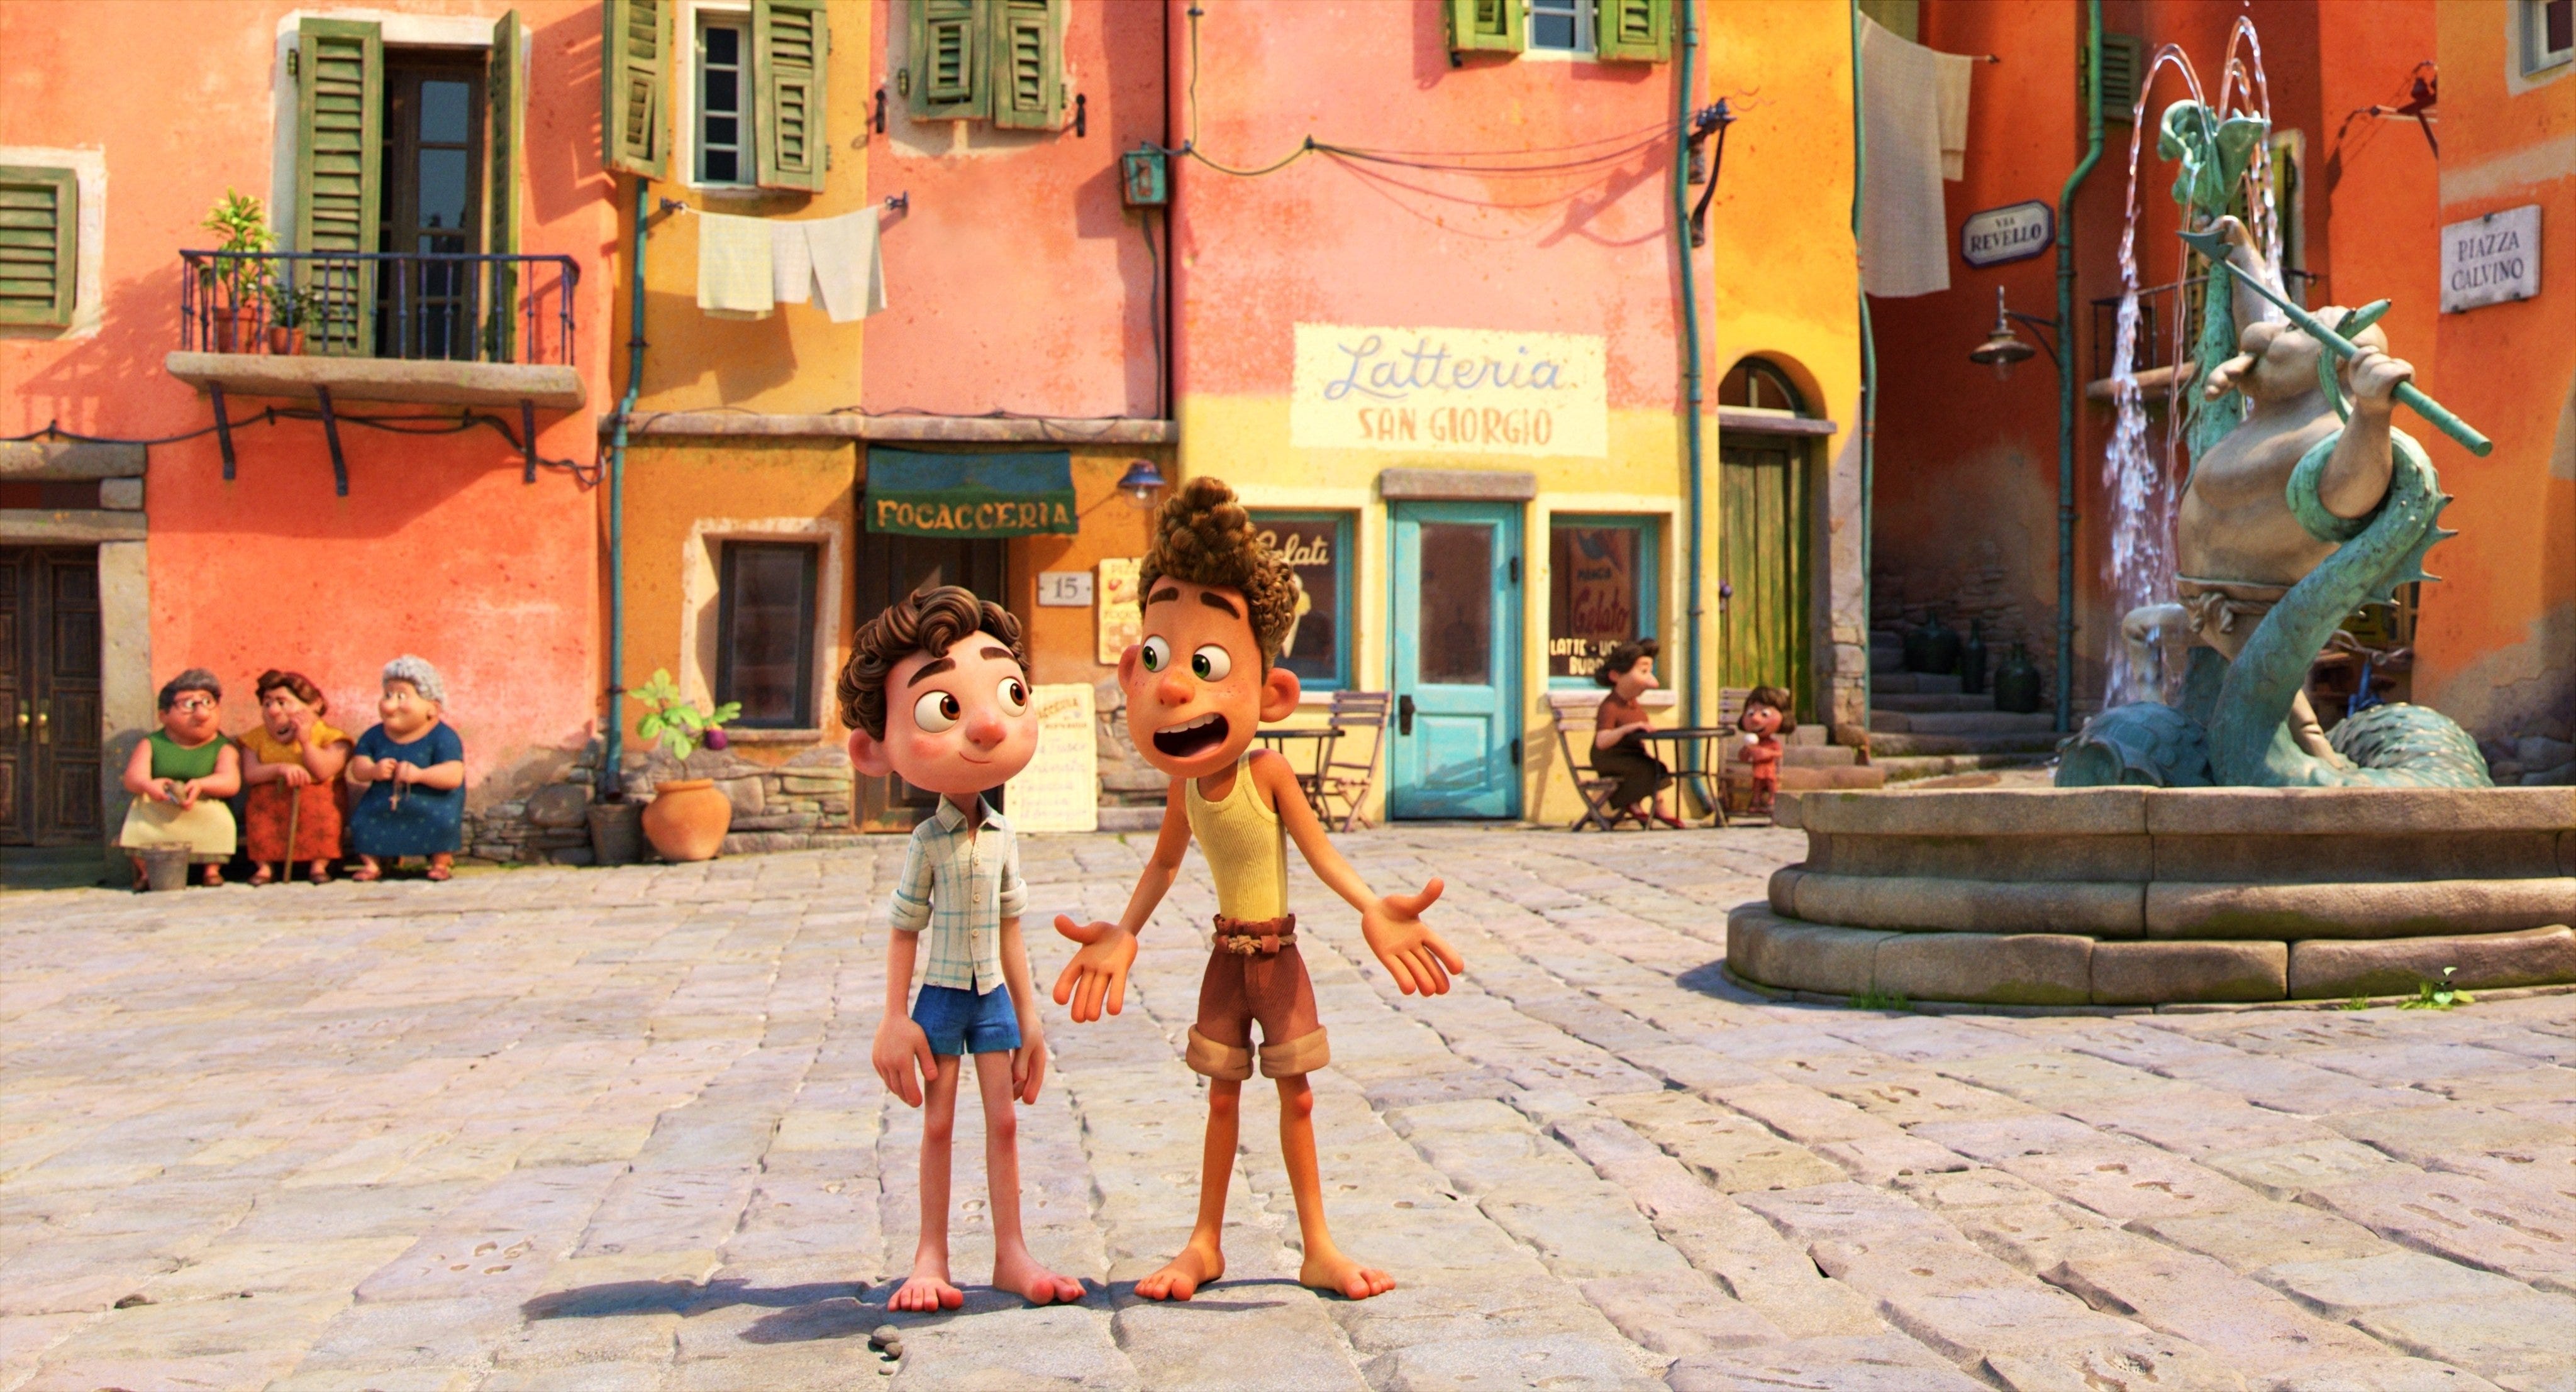 Alberto, voiced by Jack Dylan Grazer, right, and Luca, voiced by Jacob Tremblay, in a scene from the animated film "Luca."